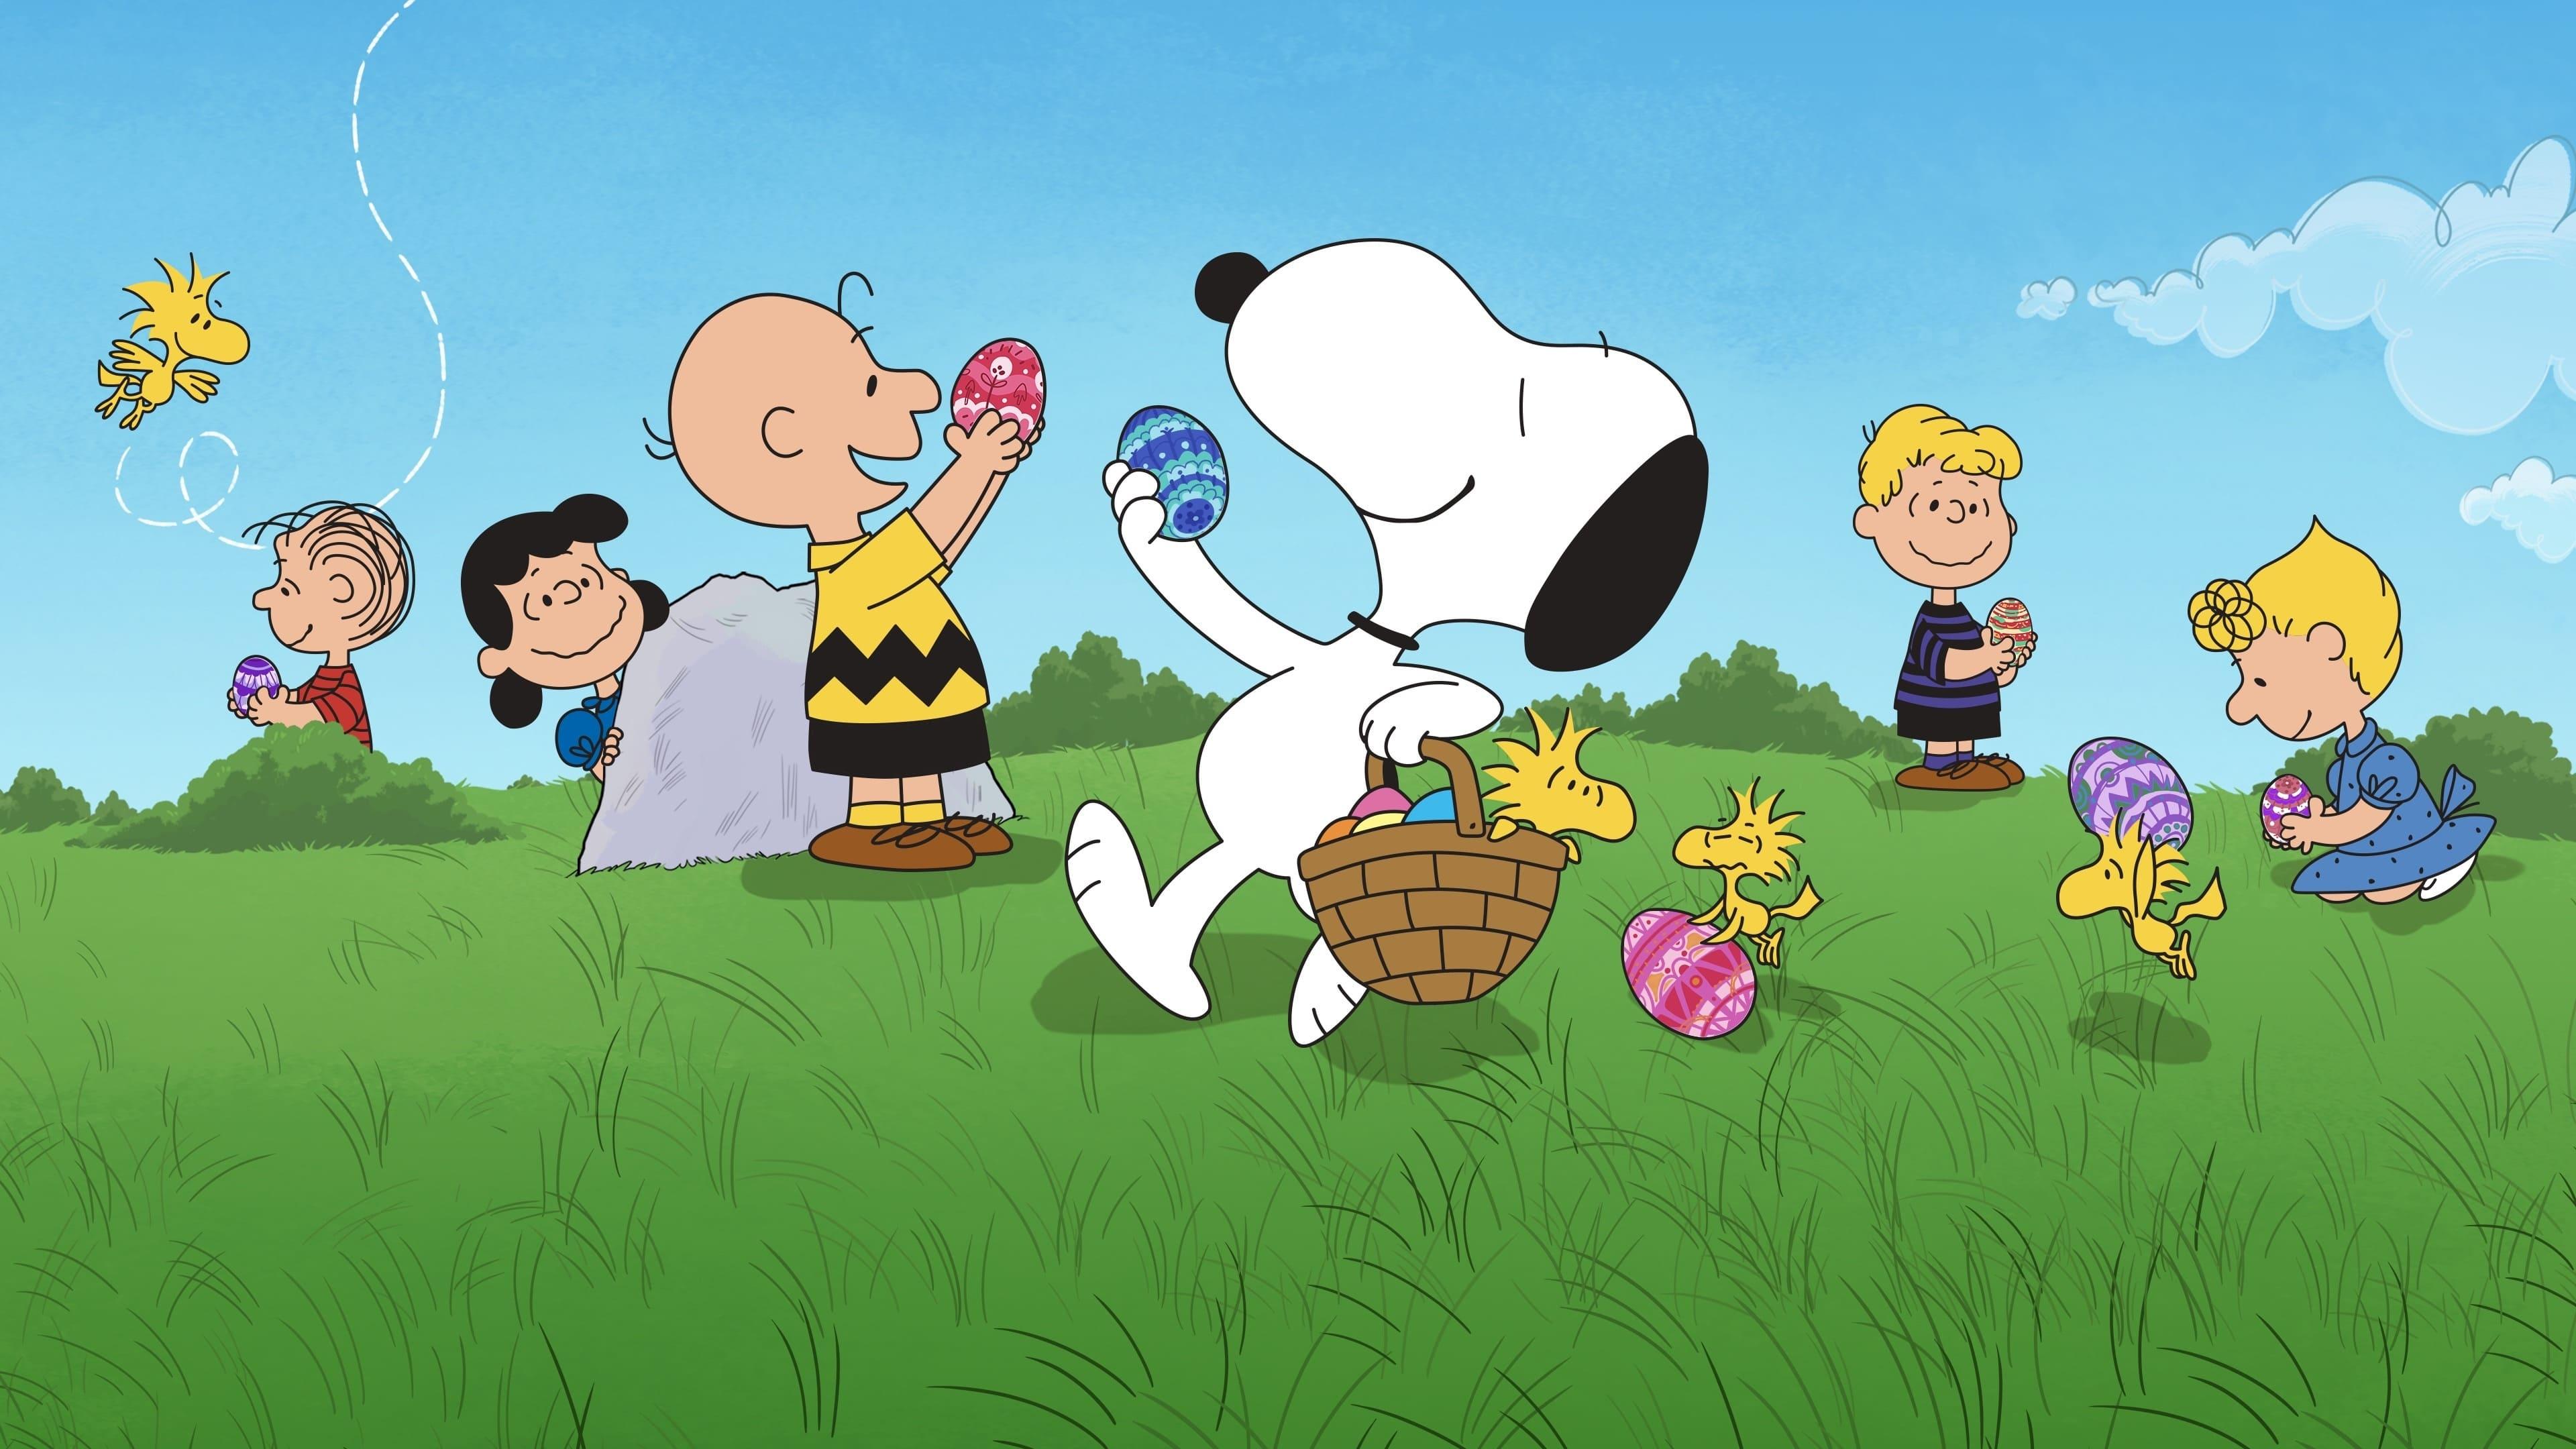 It's the Easter Beagle, Charlie Brown backdrop